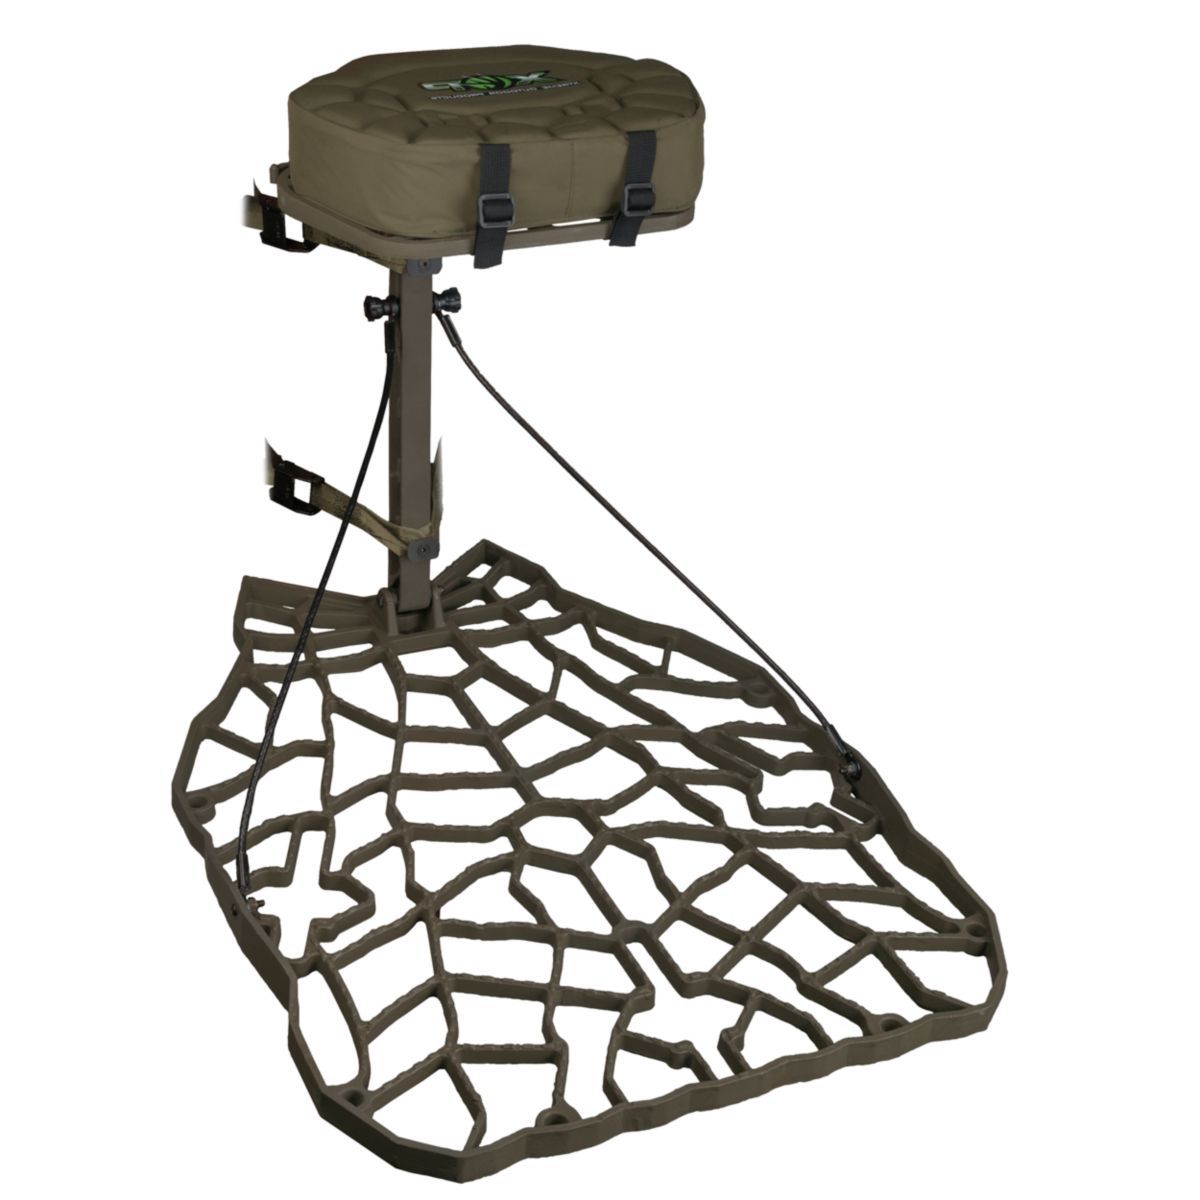 Xtreme® Outdoor Products Maximus Hang-On Treestand